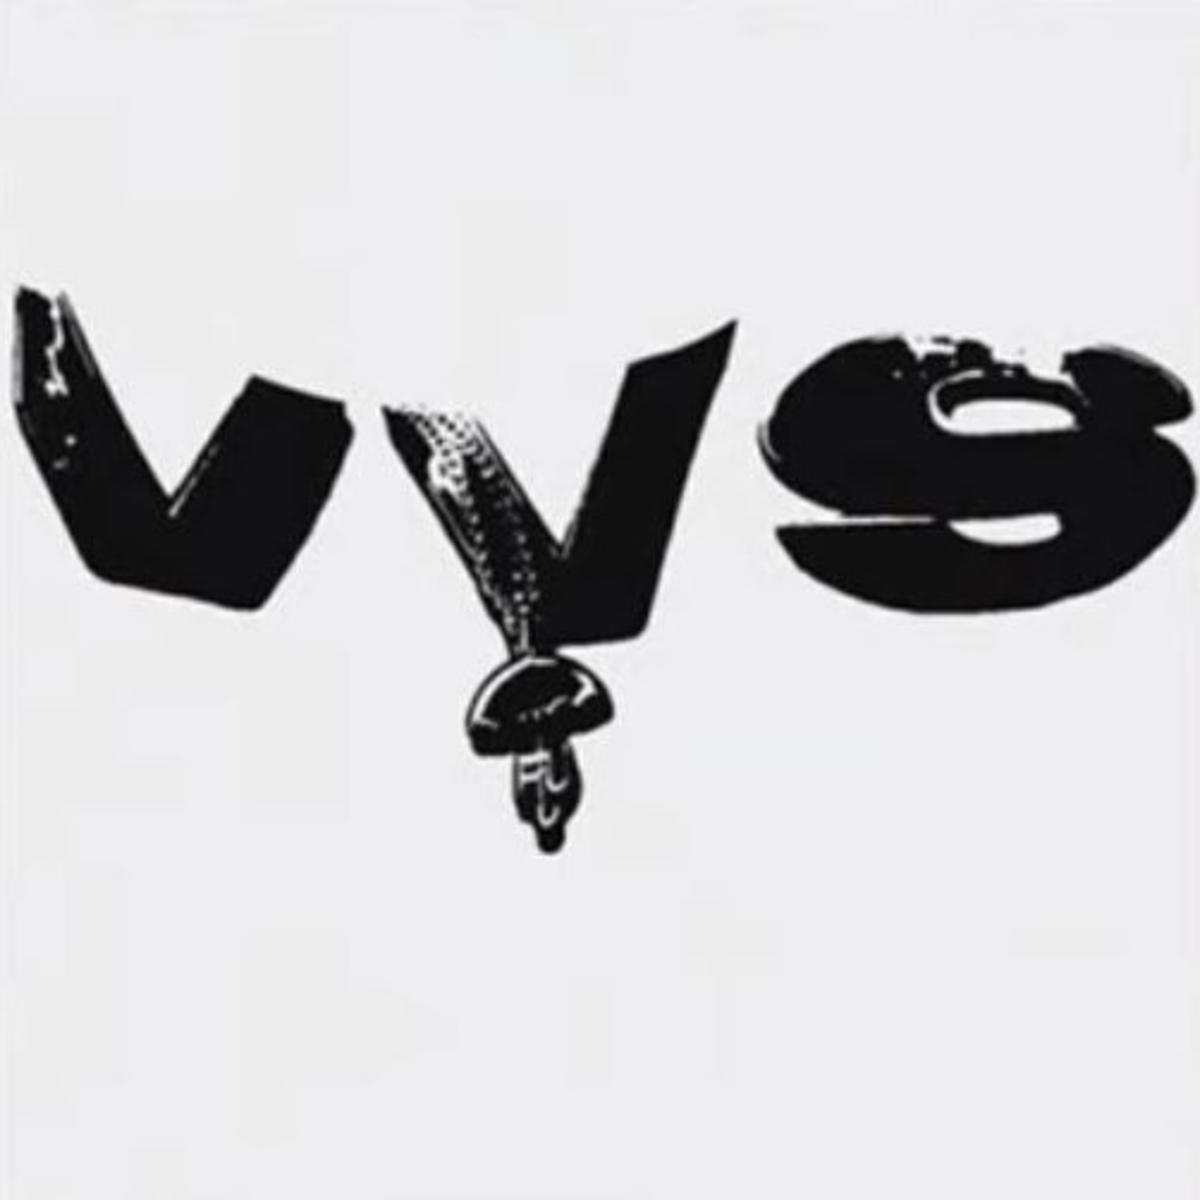 Listen To “VVS Capsule” By Tory Lanez